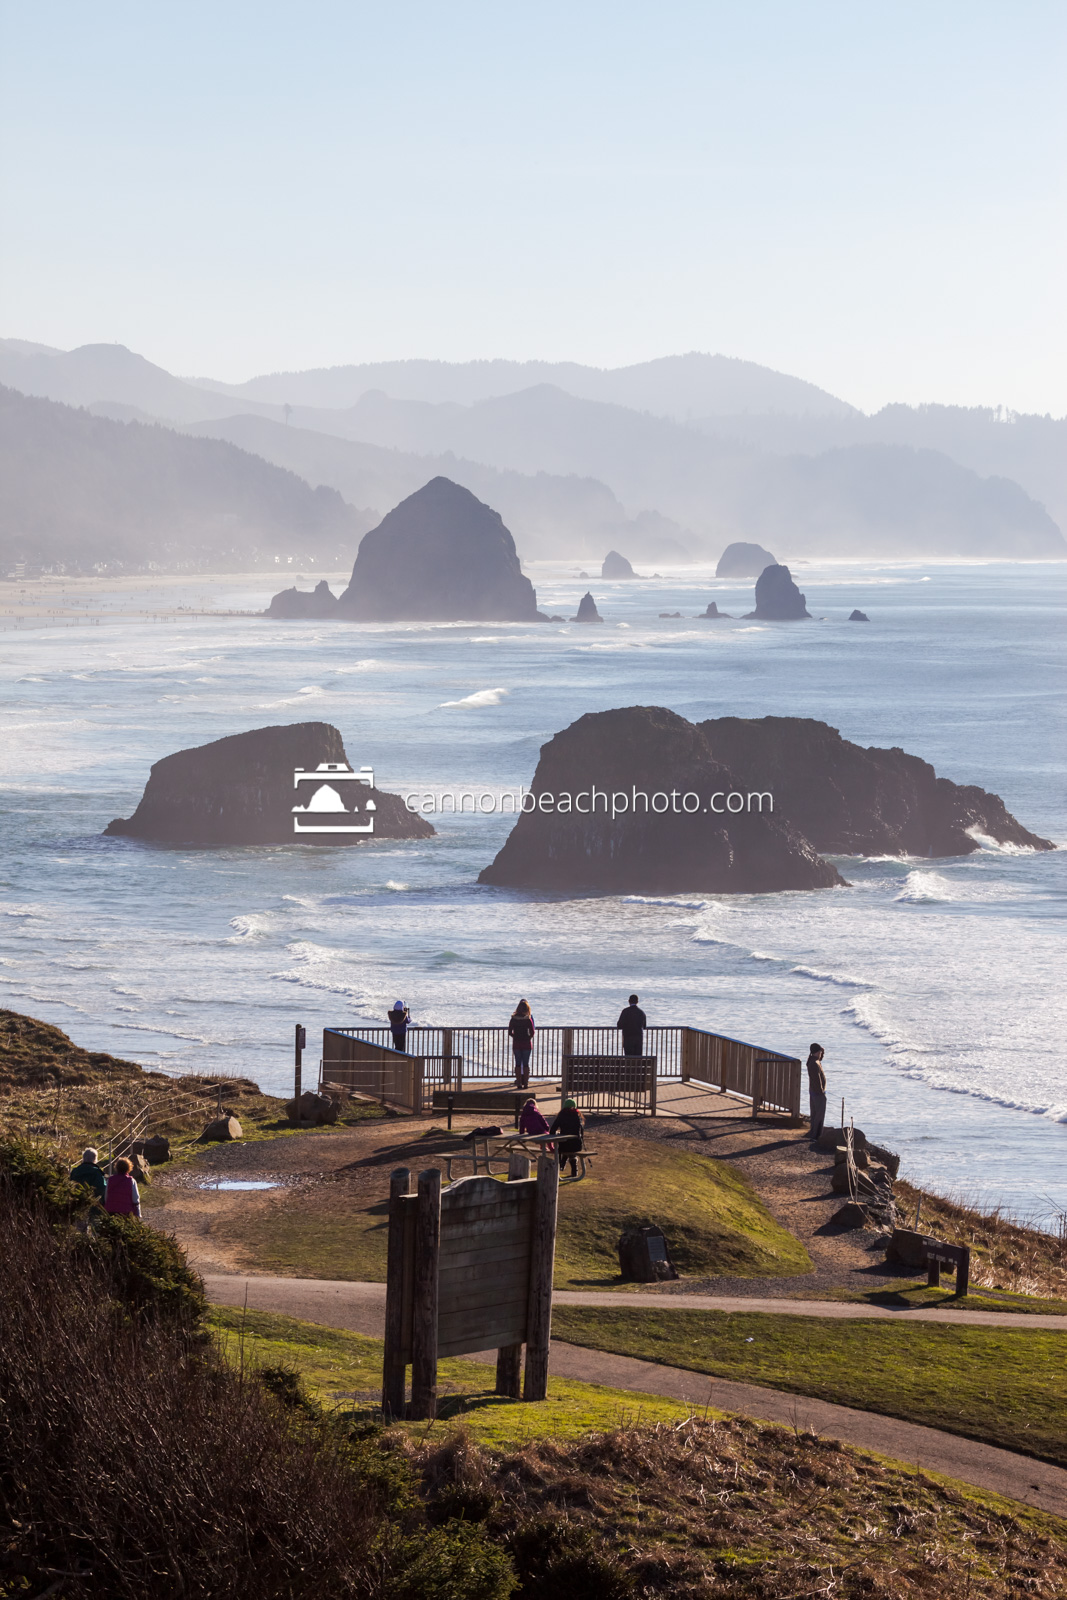 Winter Viewpoint at Ecola State Park